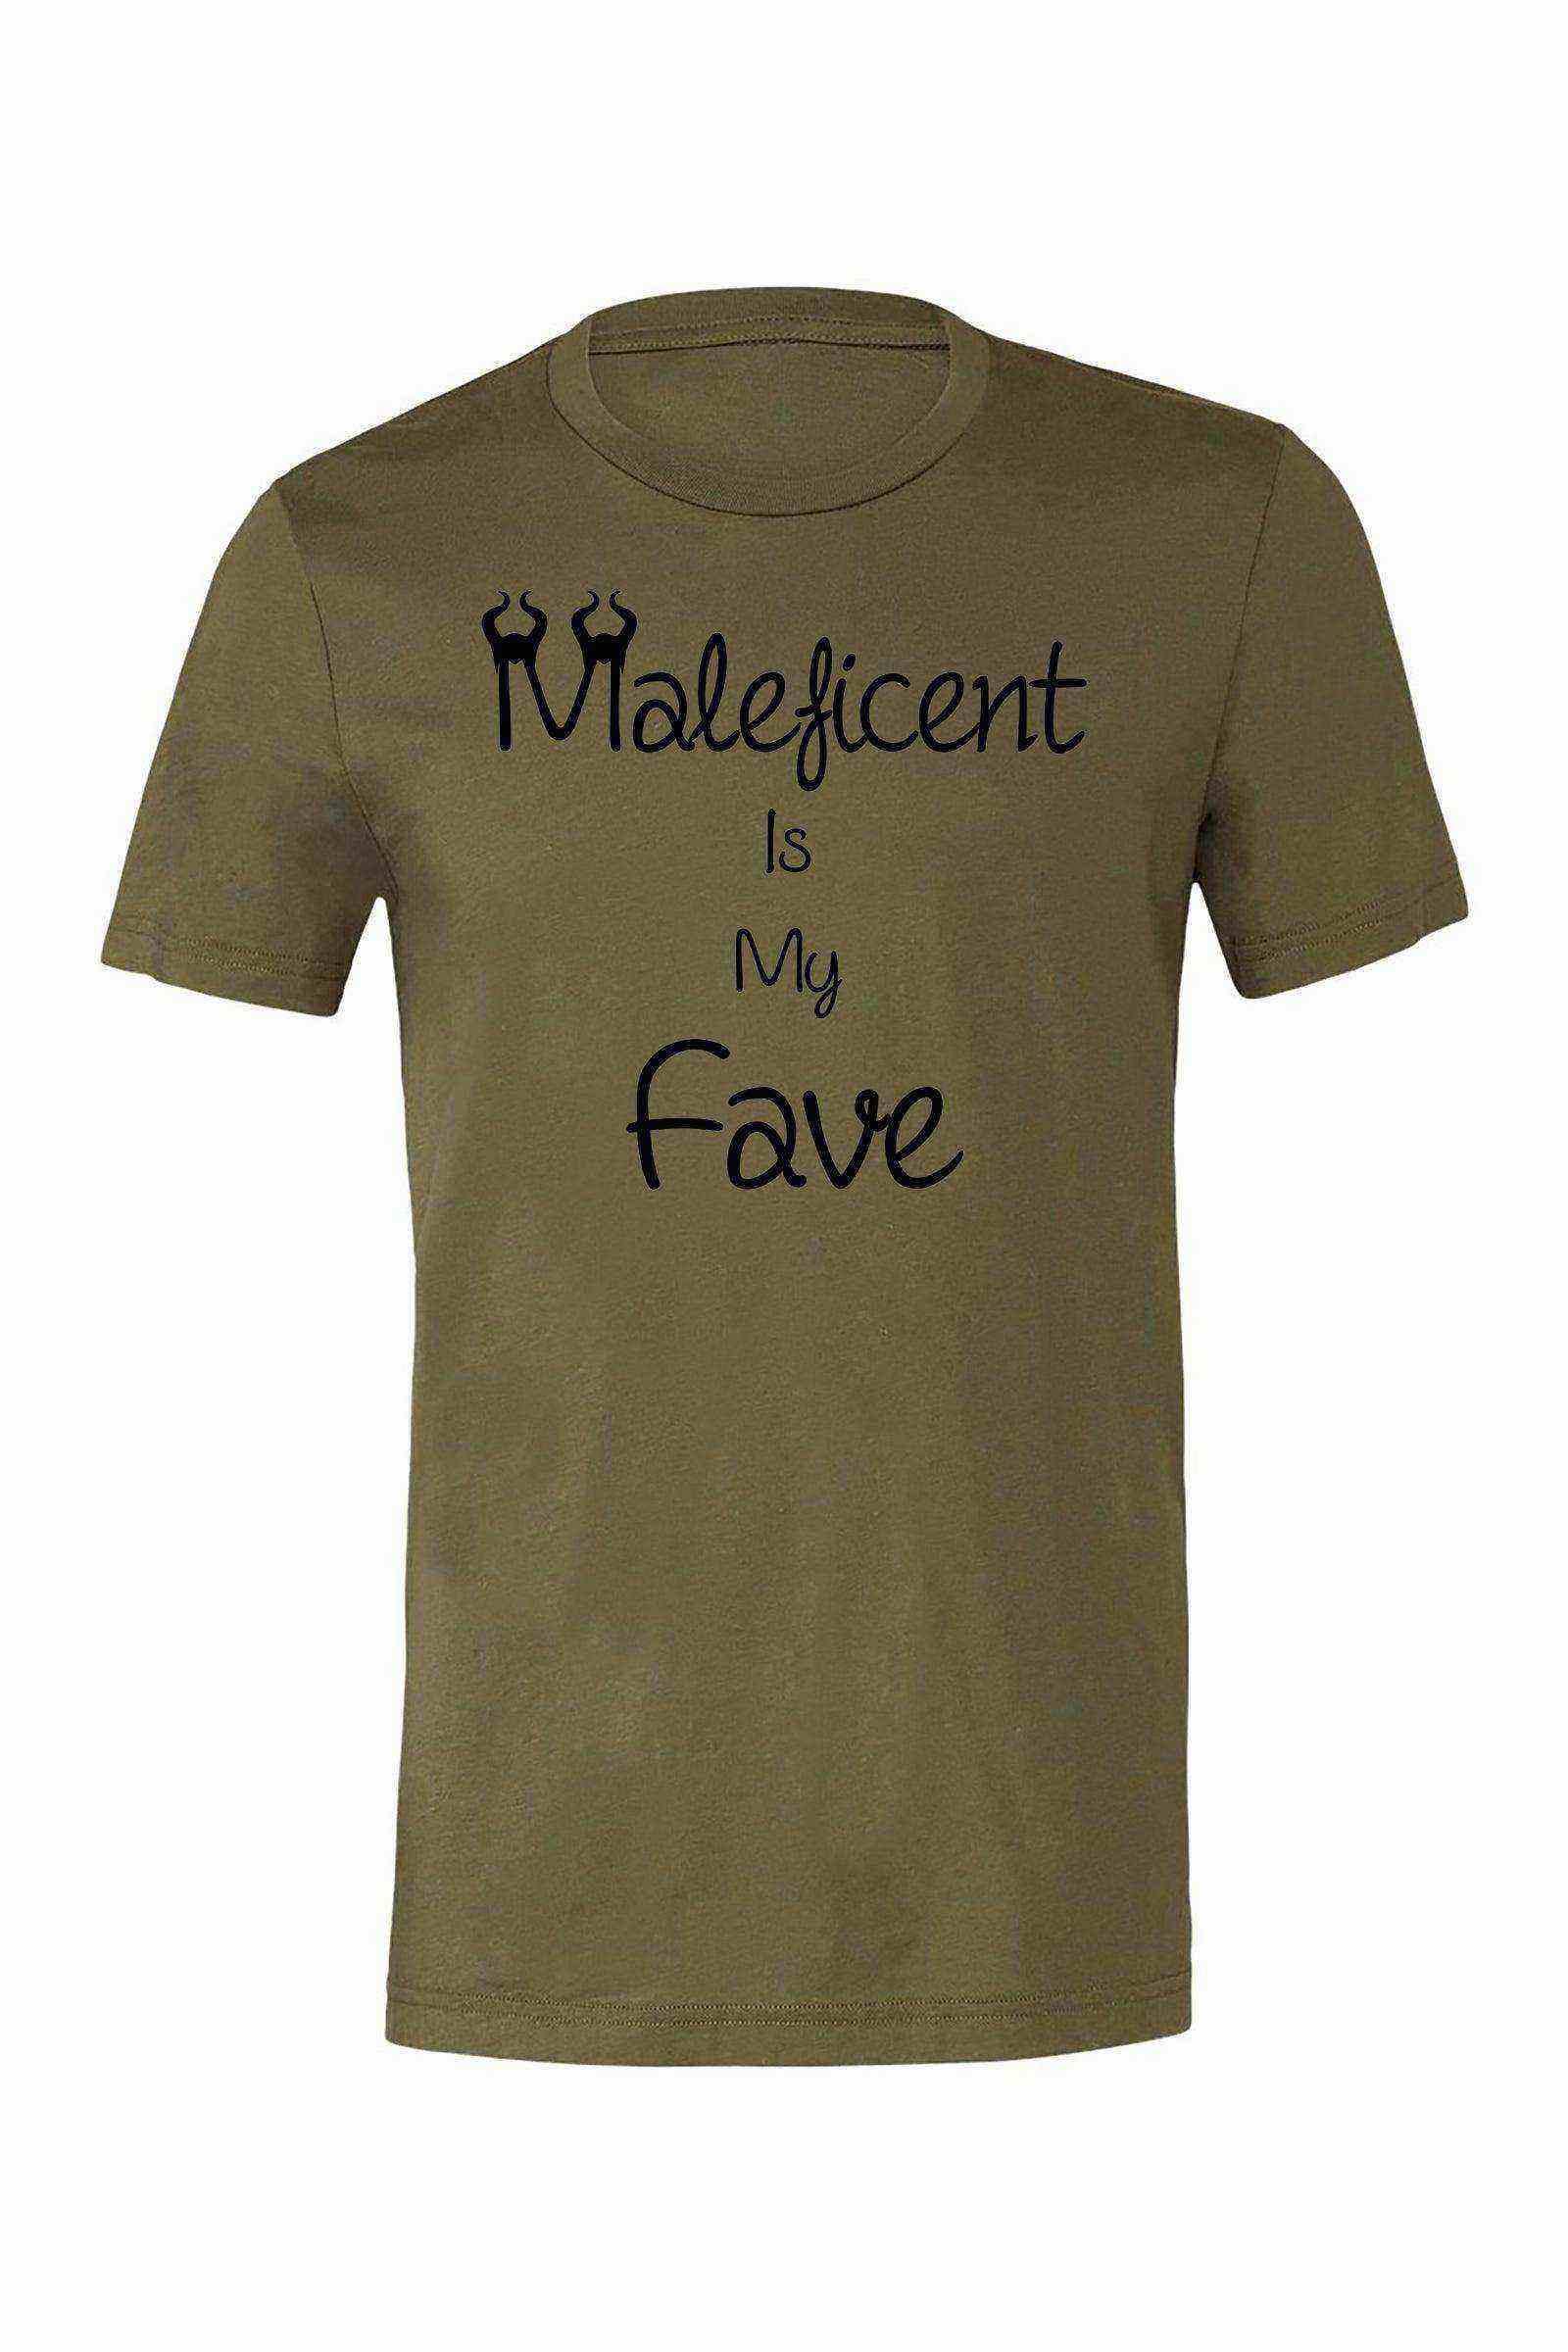 Youth | Maleficent is my Fave Shirt - Dylan's Tees